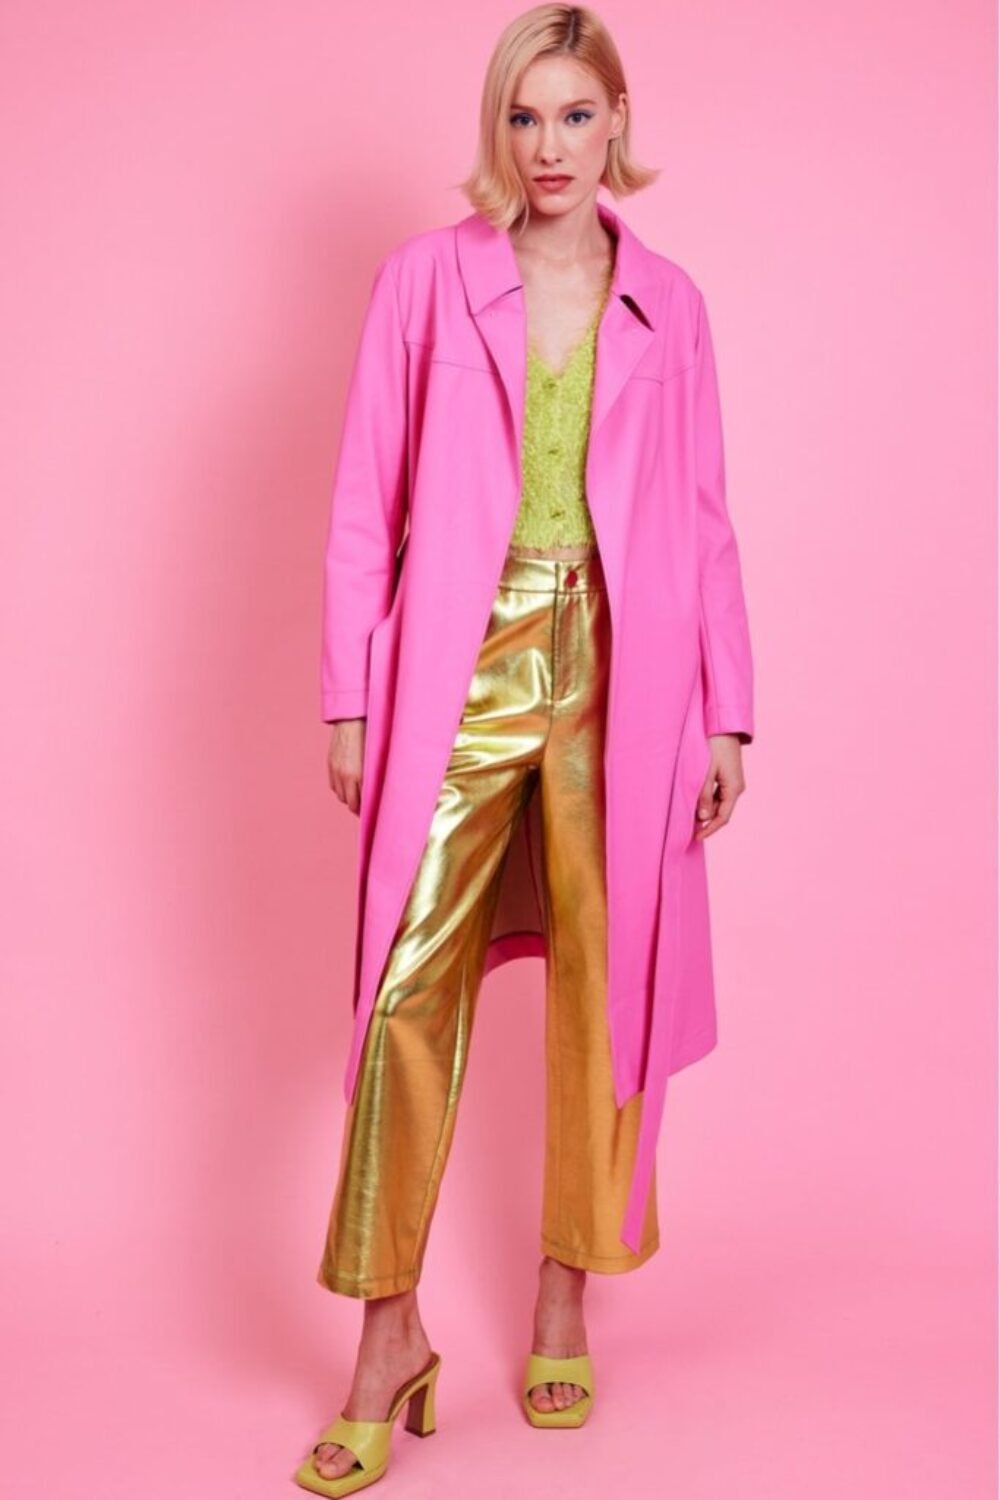 Shop Lux Pink Eco Leather Trench Coat with Faux Fur Collar and women's luxury and designer clothes at www.lux-apparel.co.uk